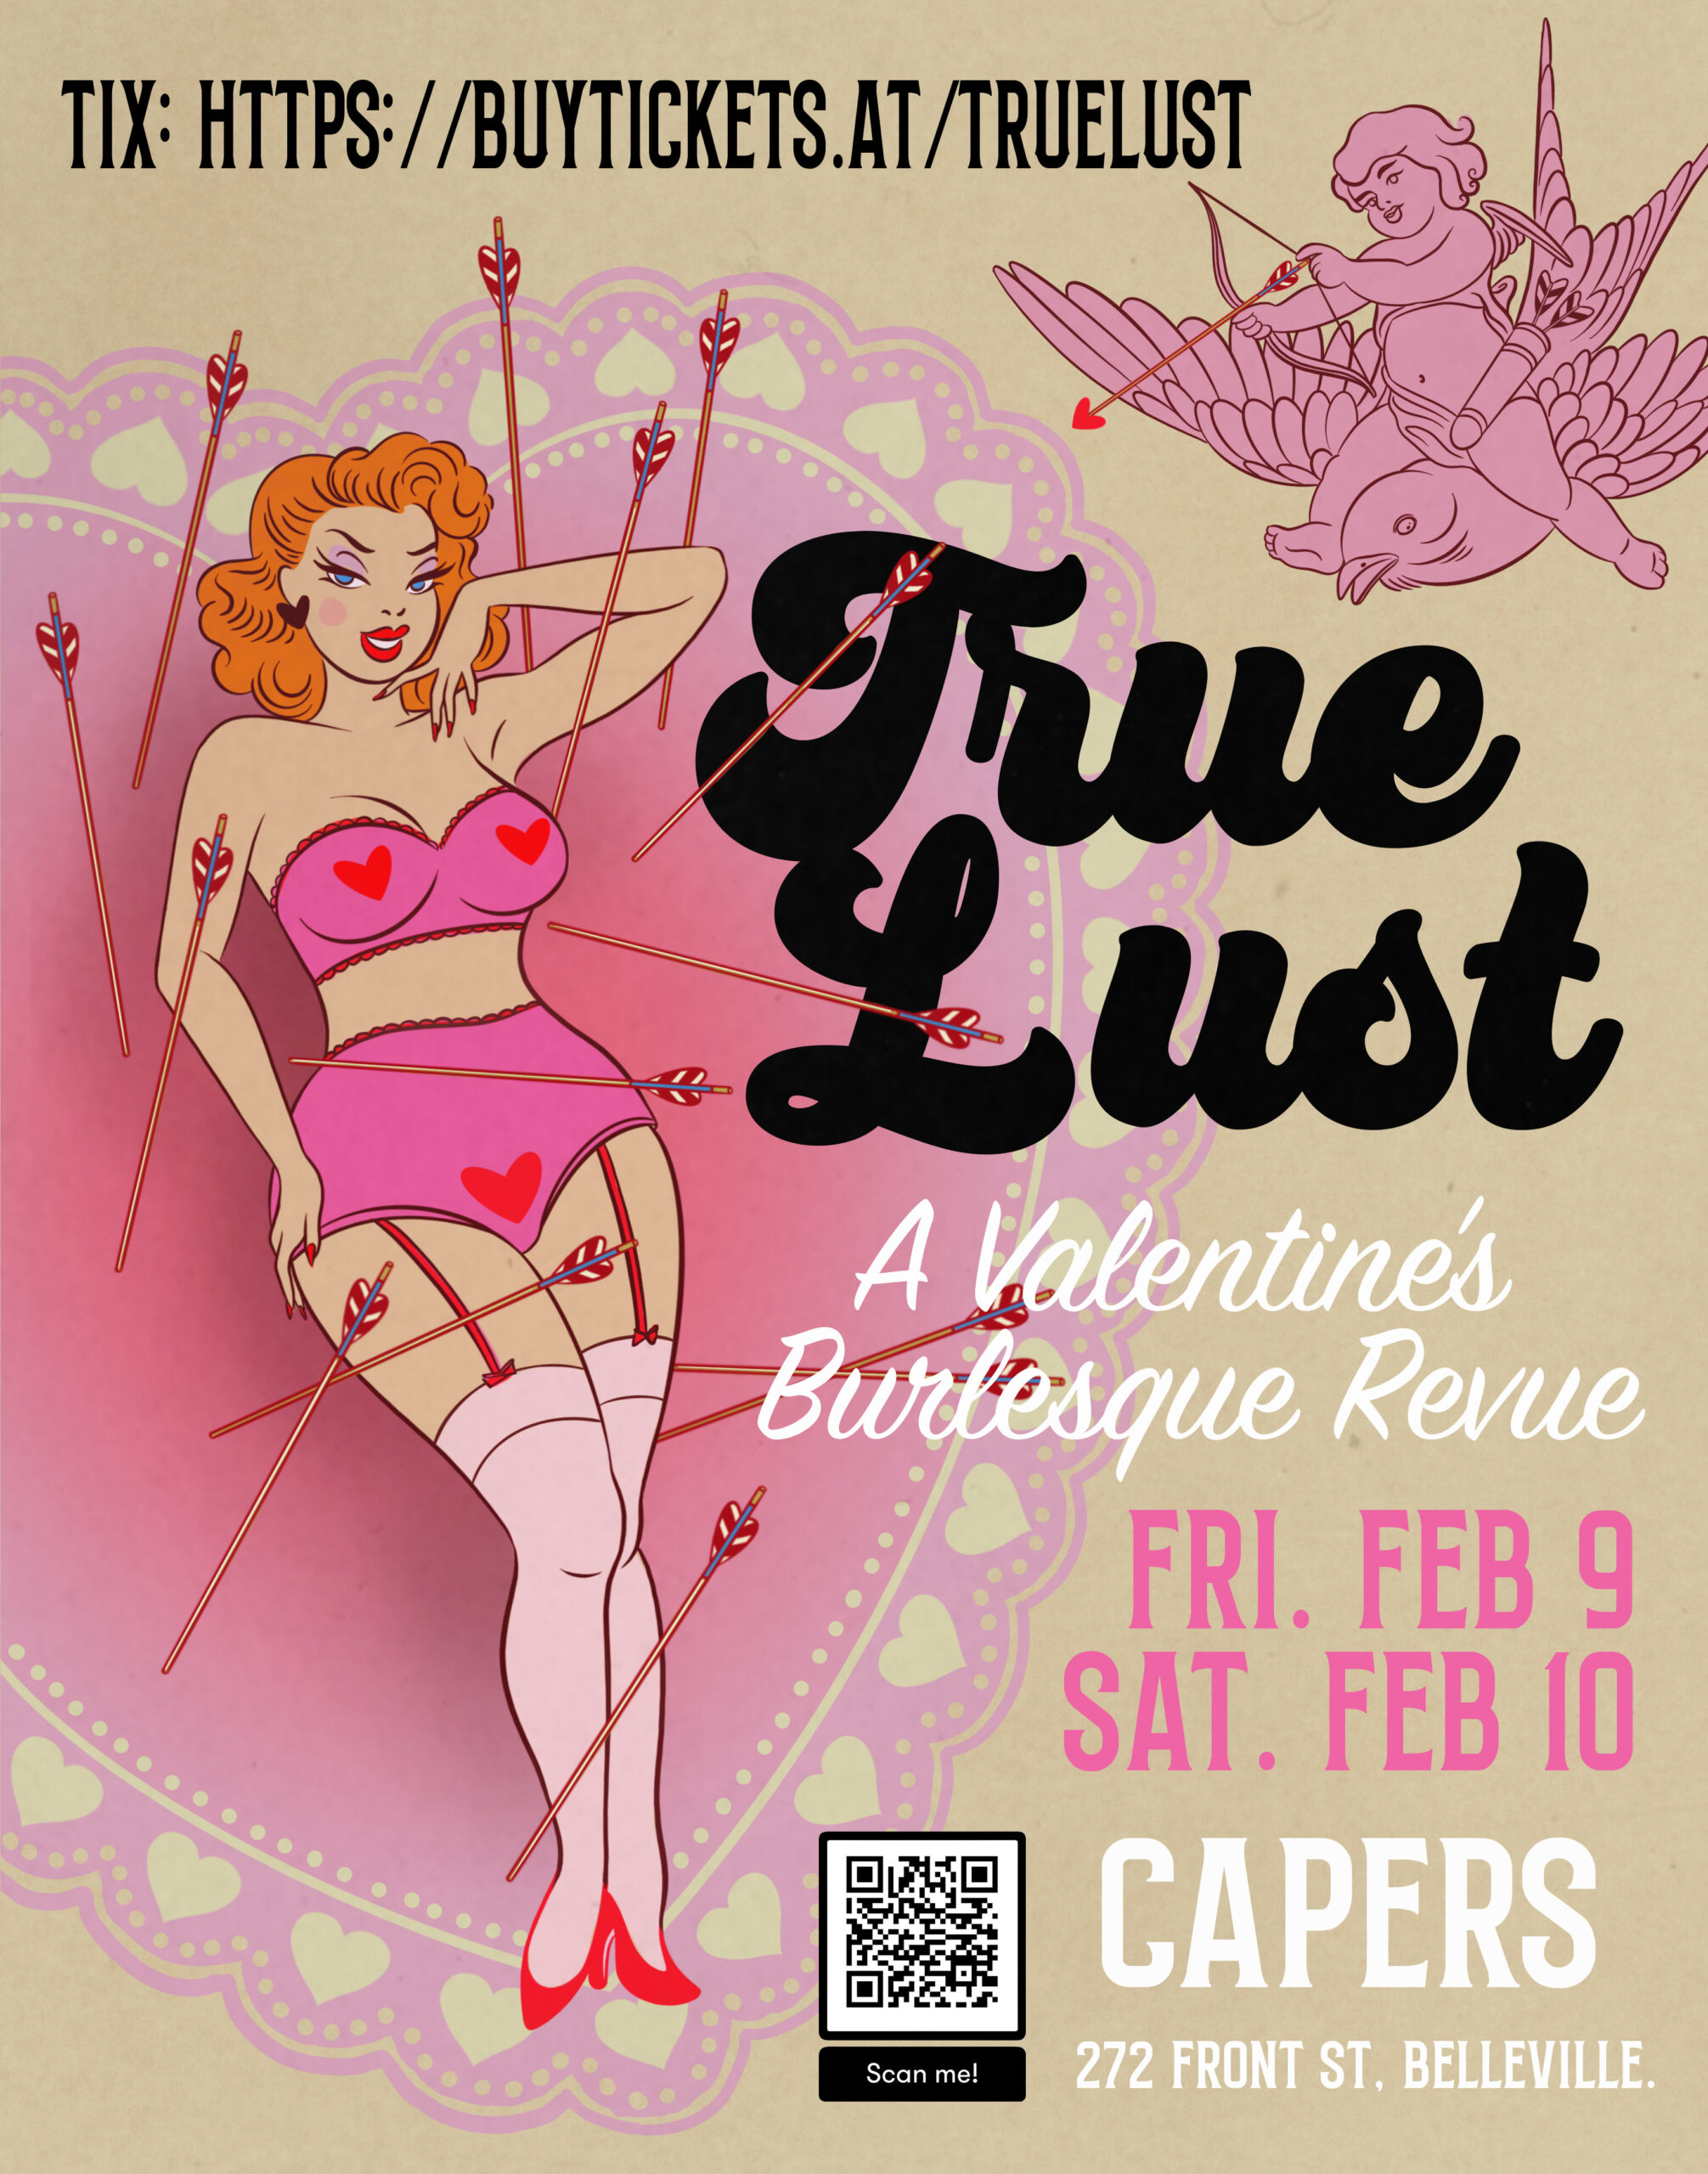 event poster with cartoon burlesque character